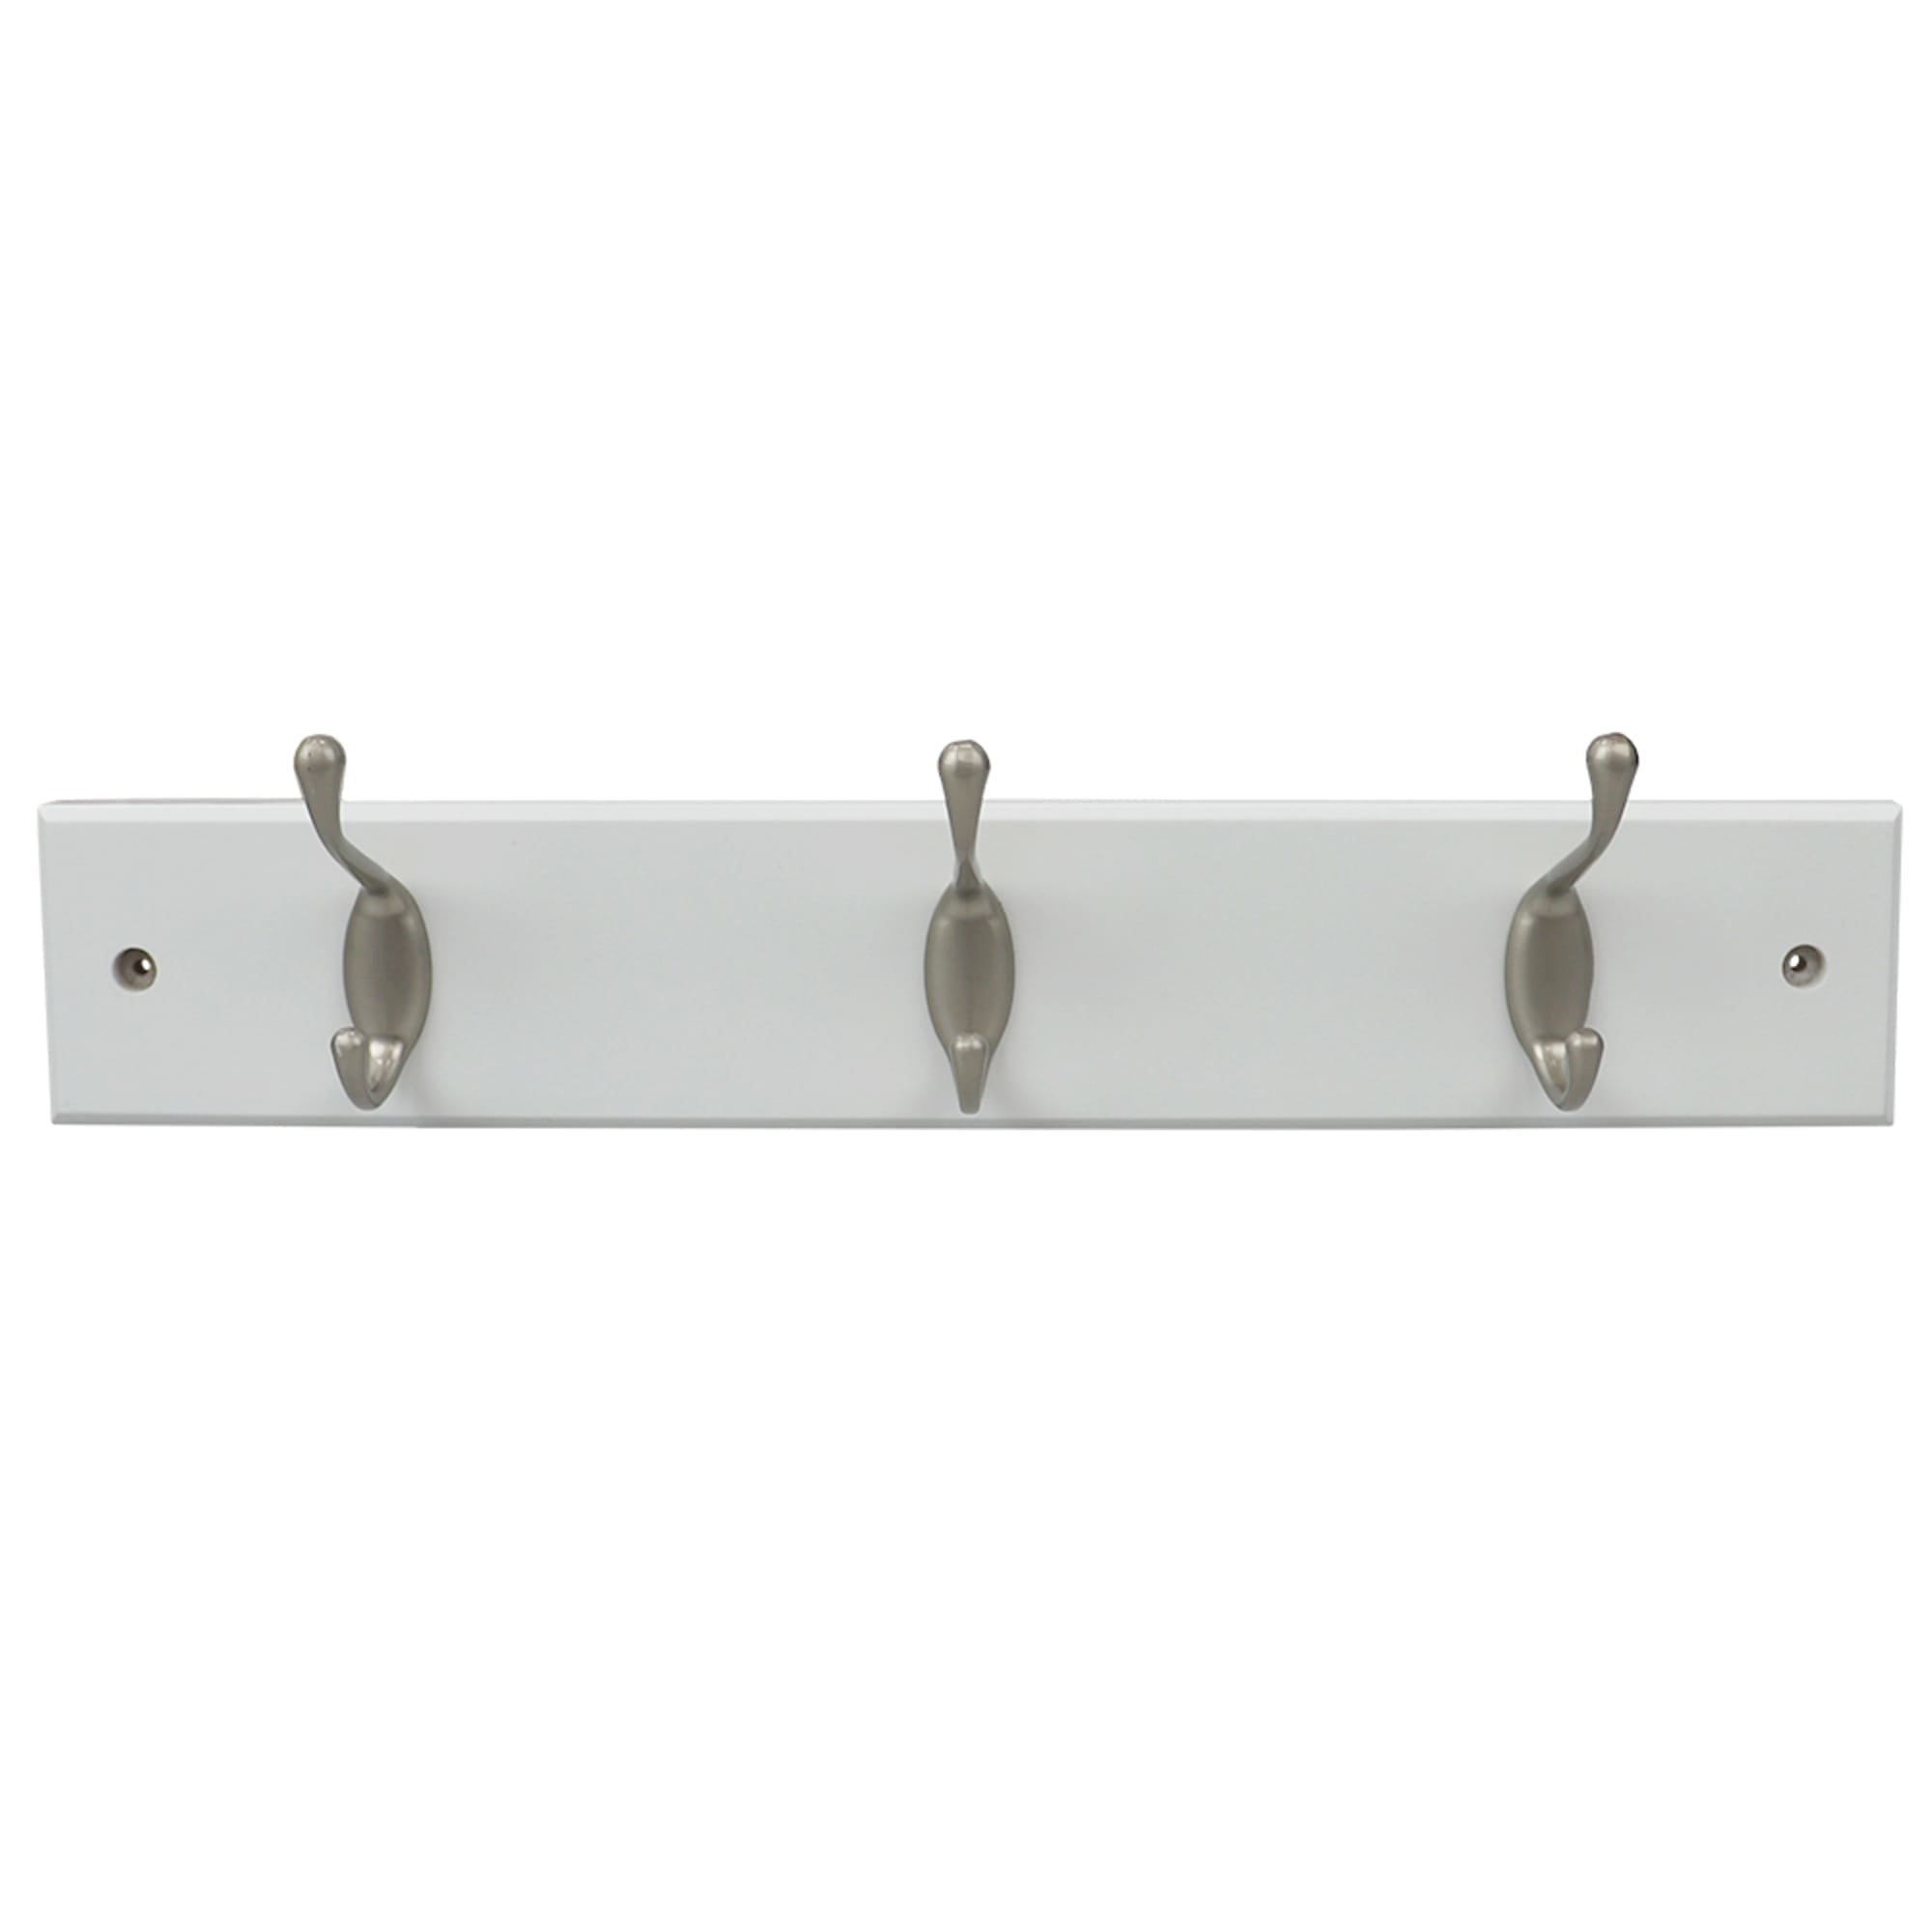 Home Basics 3 Double Hook Wall Mounted Hanging Rack, White $8.00 EACH, CASE PACK OF 12